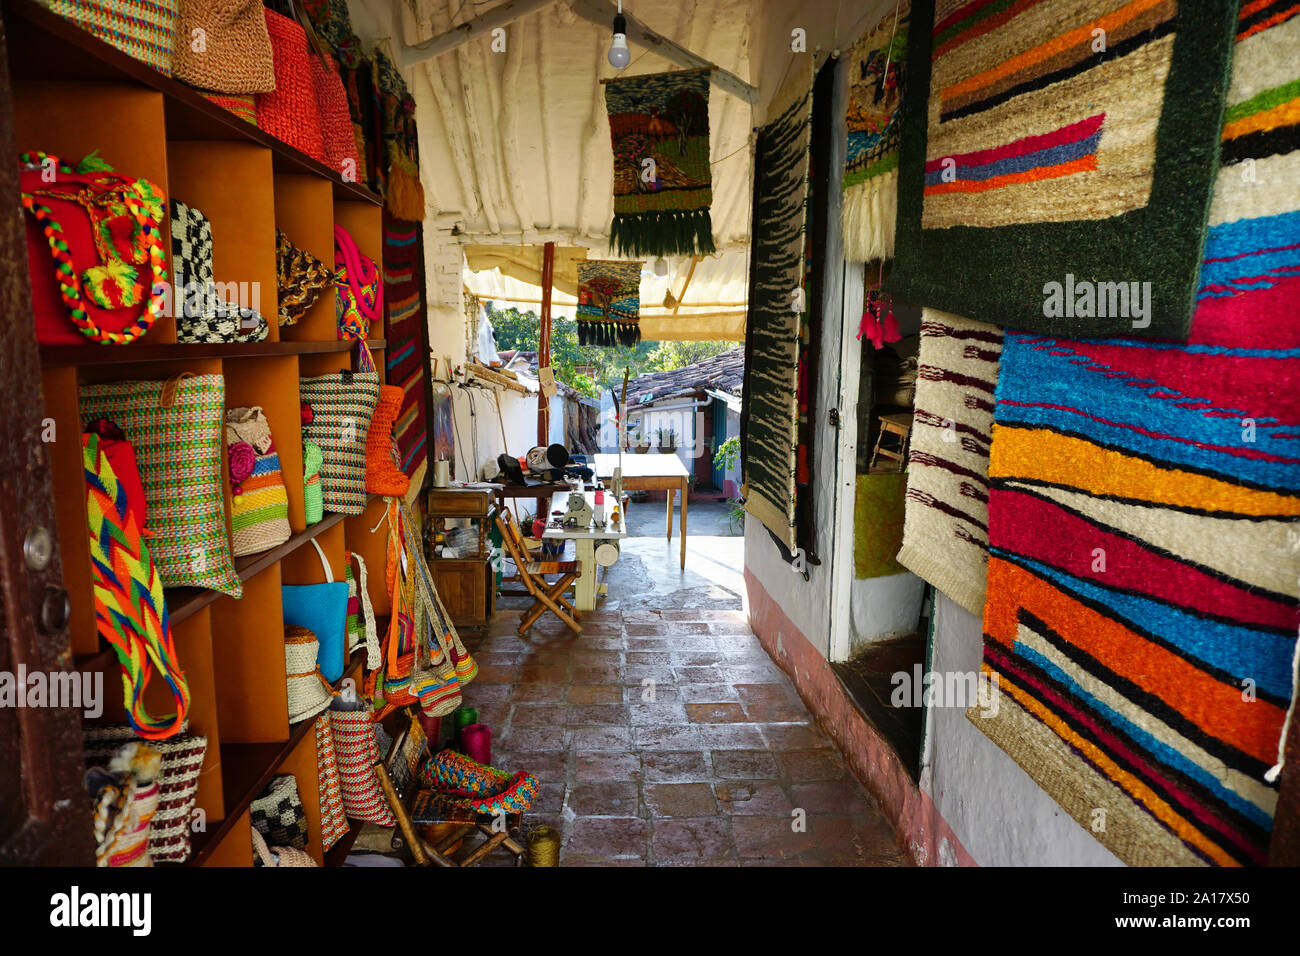 Typical Colombian crafts made in fique in store in the municipality of Curiti, Santander, Colombia Stock Photo